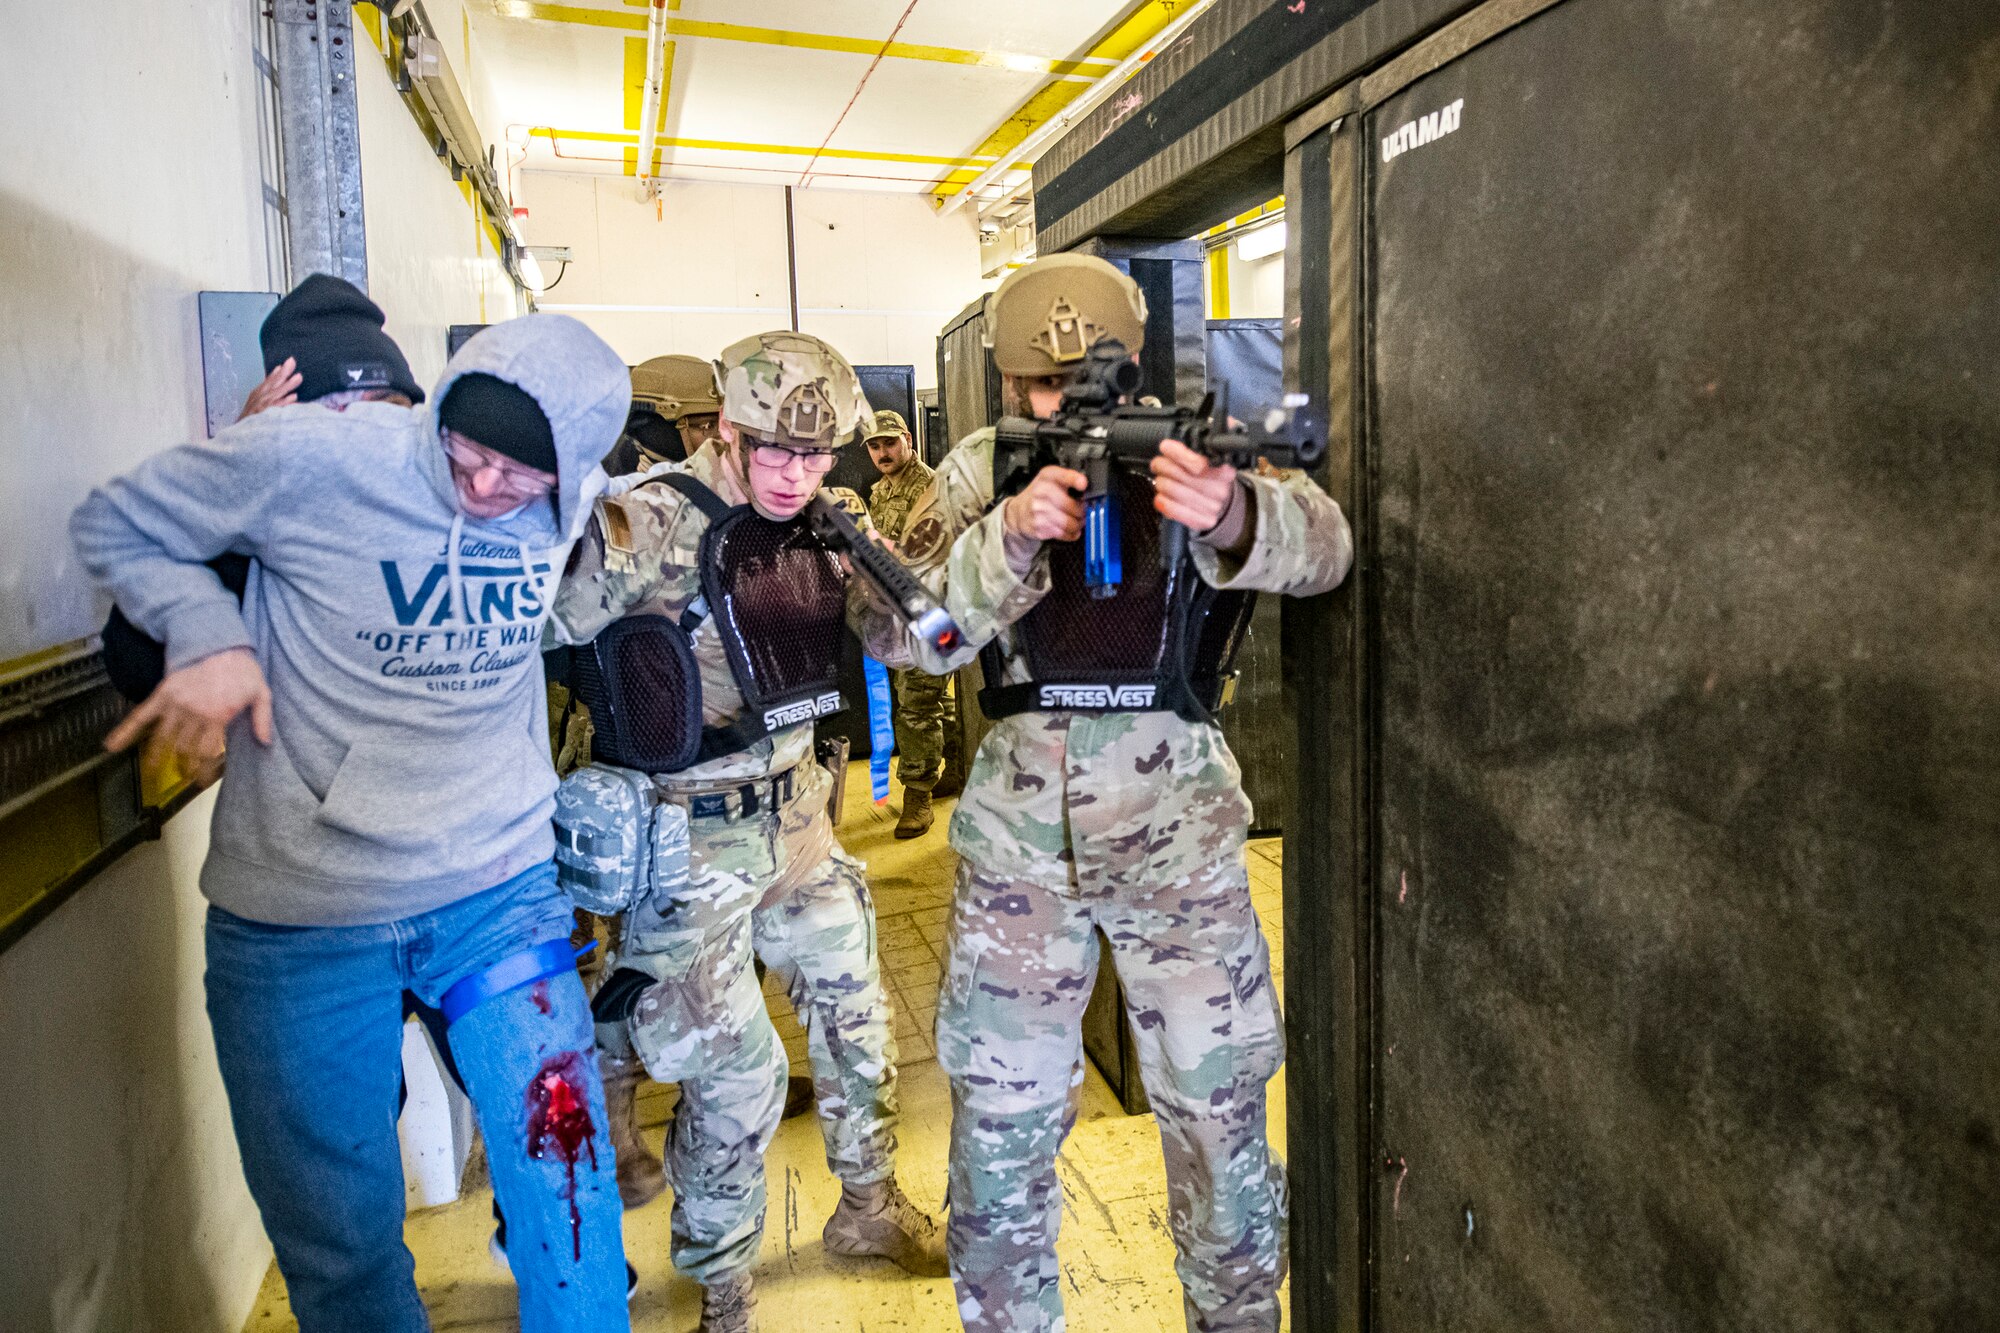 Airmen from the 423d Security Forces Squadron escort a simulated victim, left, to a safe location during an active shooter exercise at RAF Molesworth, England, Dec. 16, 2022. The 423d SFS and Medical Squadrons conducted the exercise to evaluate their overall readiness and response capabilities to an emergency situation. (U.S. Air Force photo by Staff Sgt. Eugene Oliver)